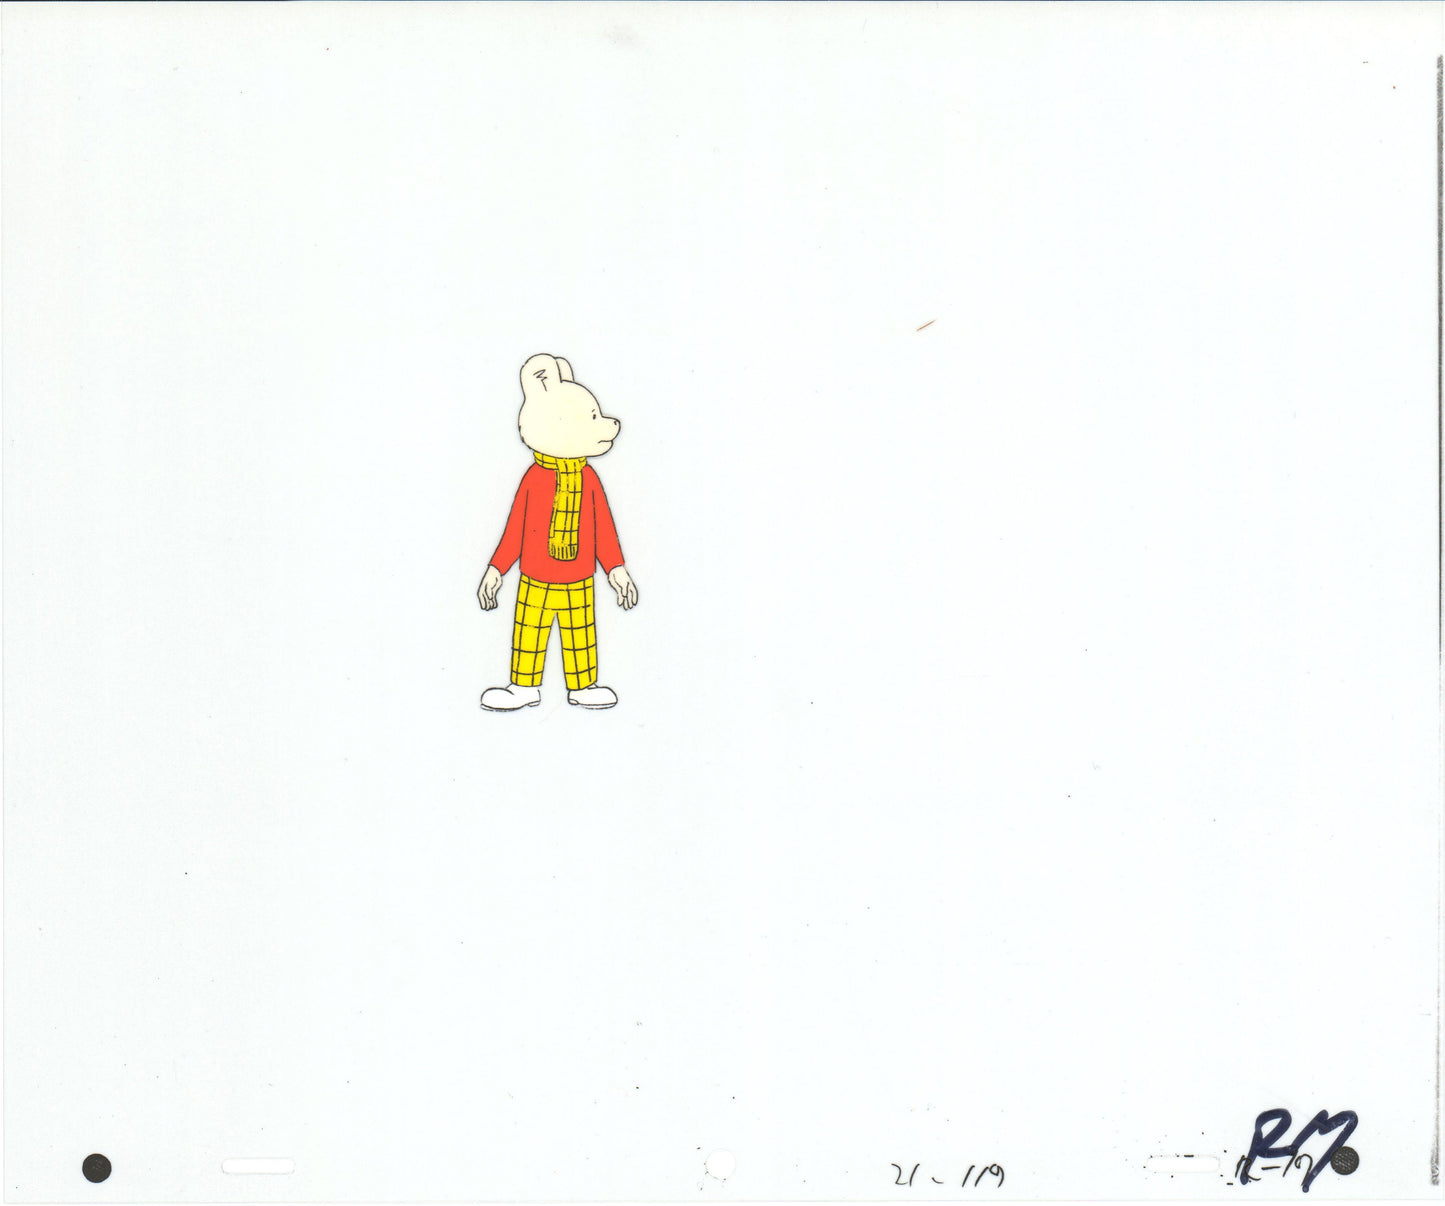 RUPERT Bear Original Production Animation Cel and Drawing from the Cartoon by Nelvana Tourtel Animation 1990s B70291